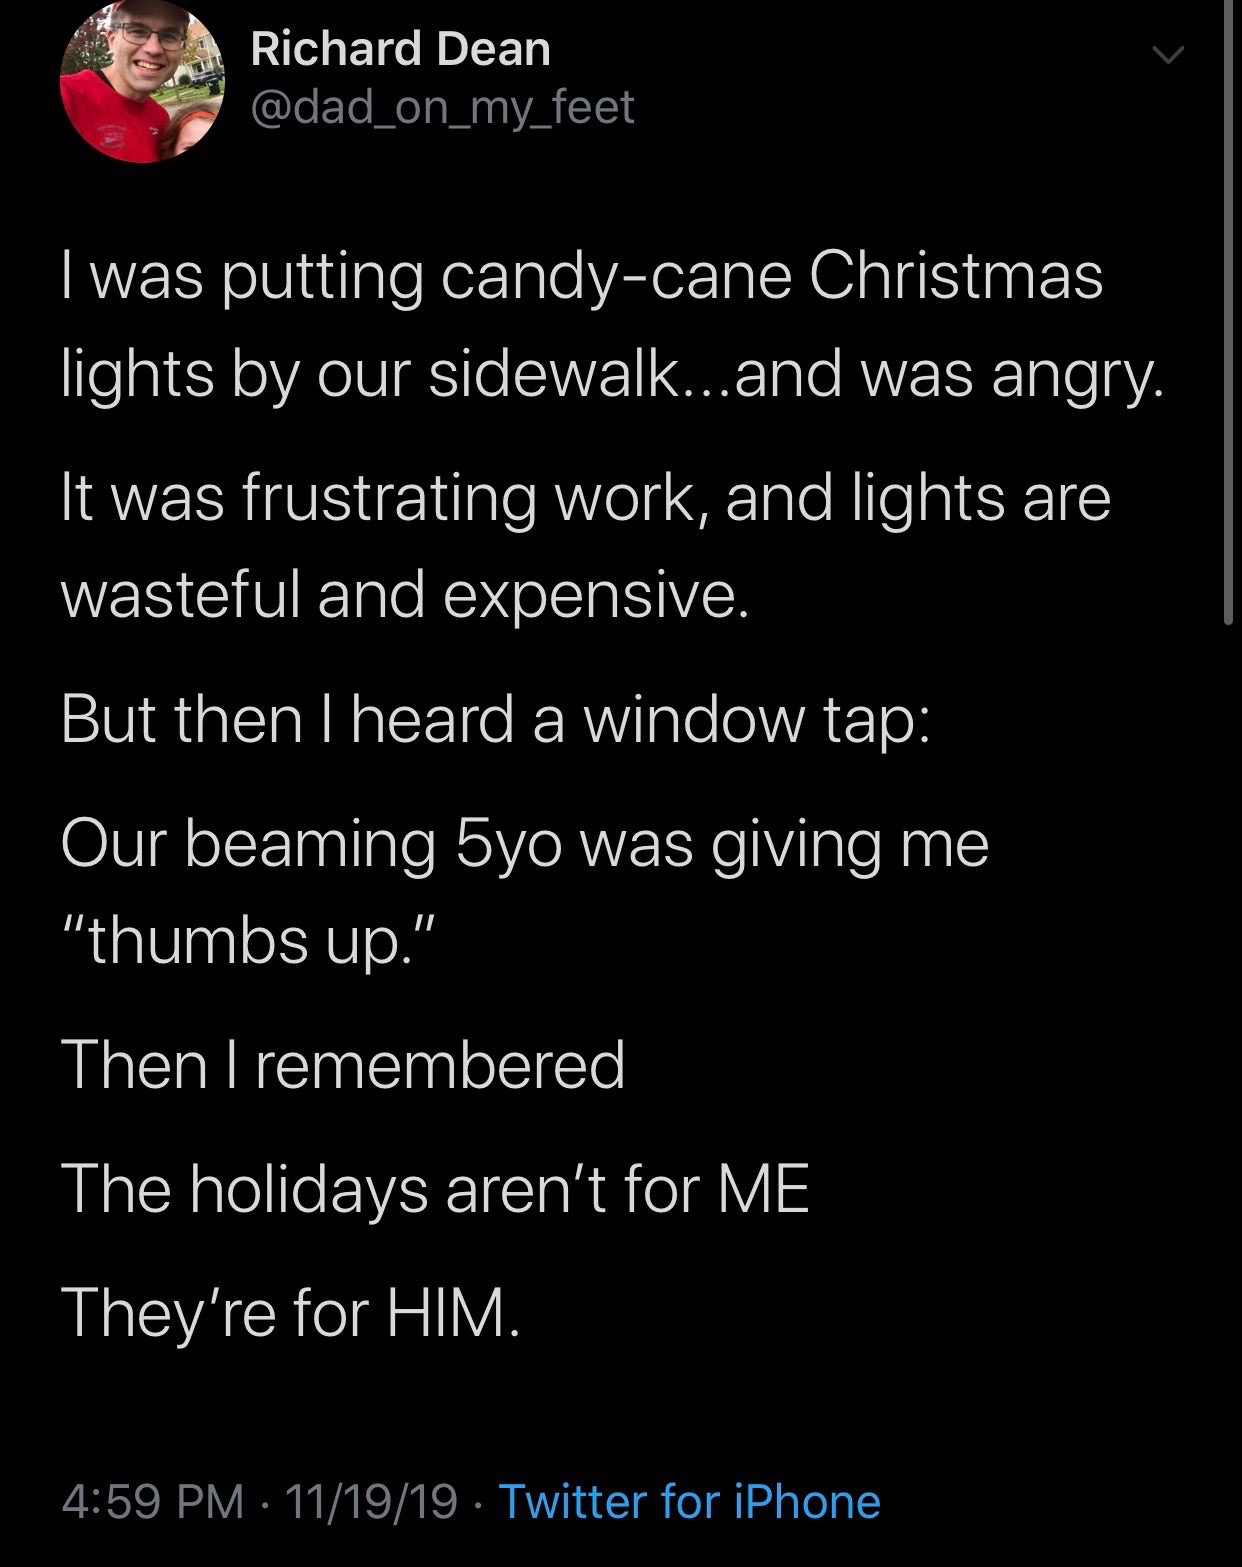 wholesome meme - atmosphere - Richard Dean I was putting candycane Christmas lights by our sidewalk...and was angry. It was frustrating work, and lights are wasteful and expensive. But then I heard a window tap Our beaming 5yo was giving me